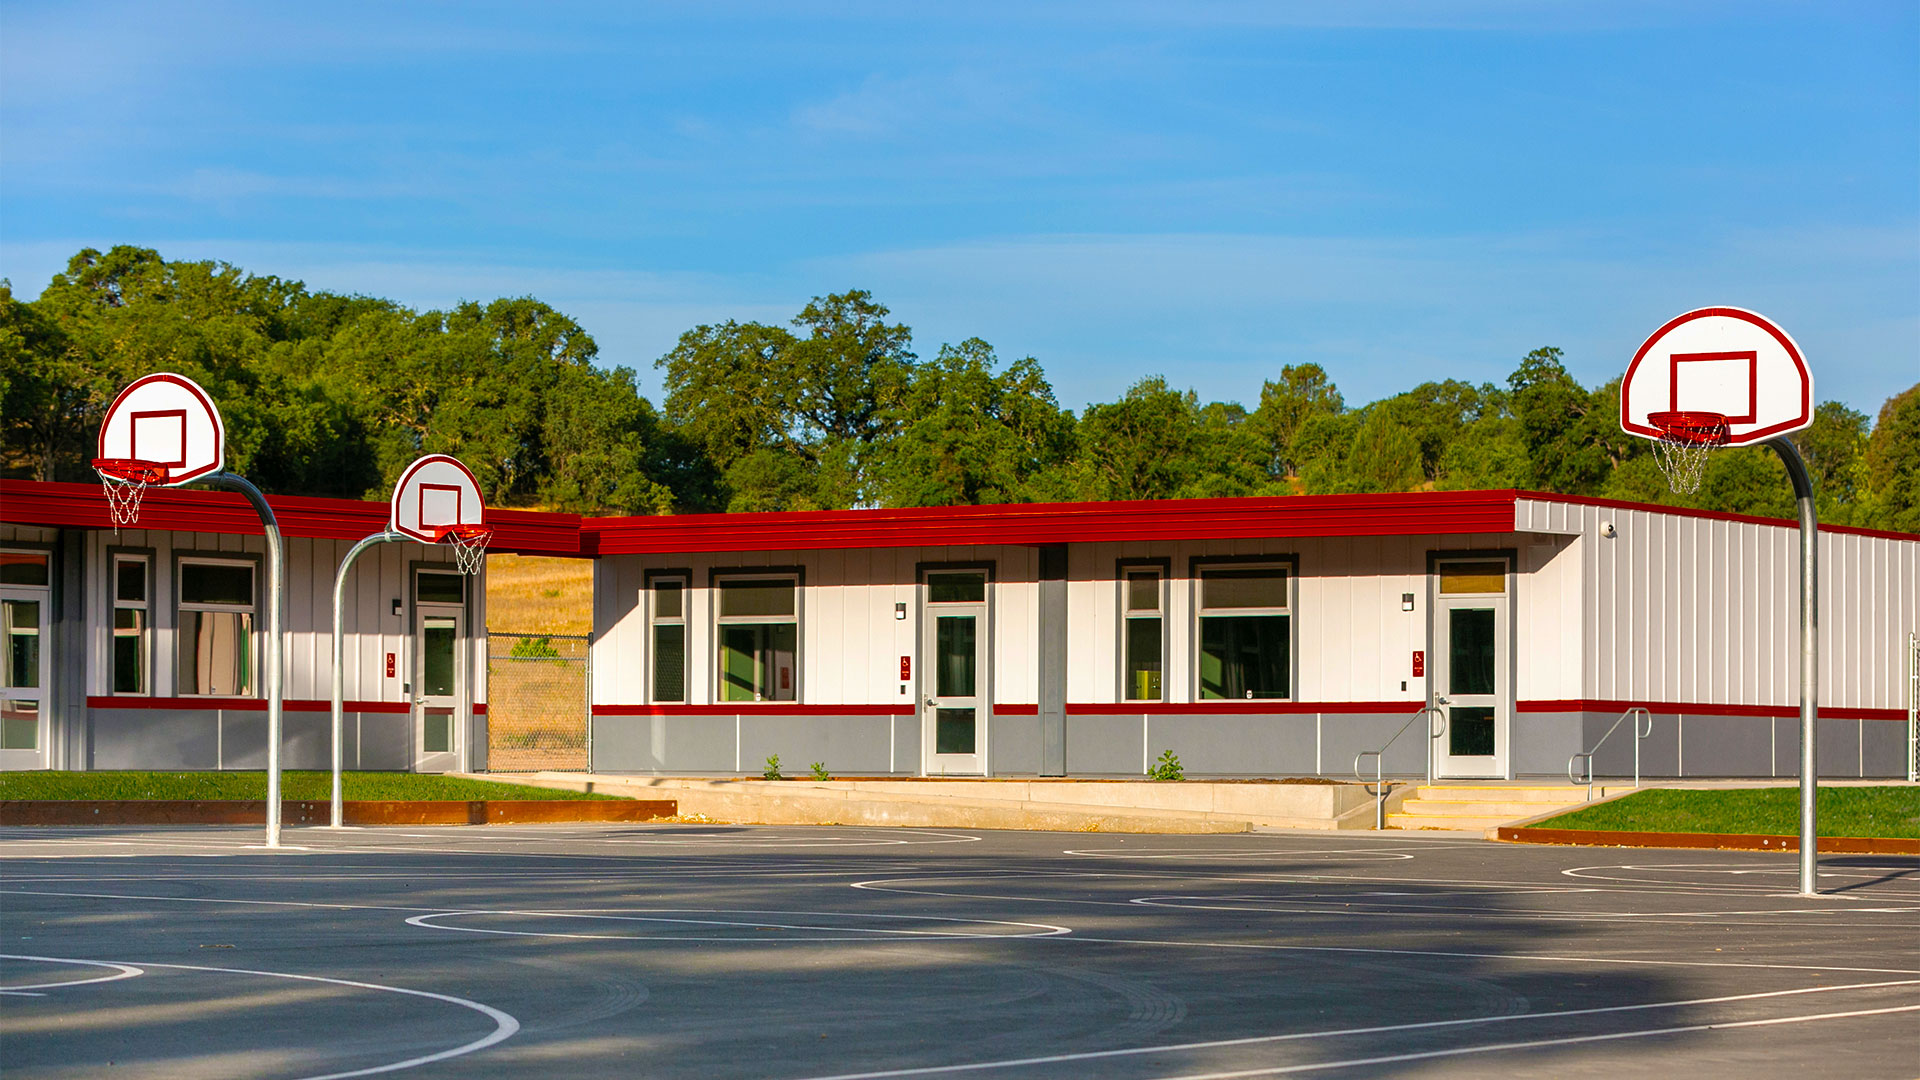 Portable classrooms with white panel walls, gray wainscot, and red trim. Blacktop with planters in front of building.